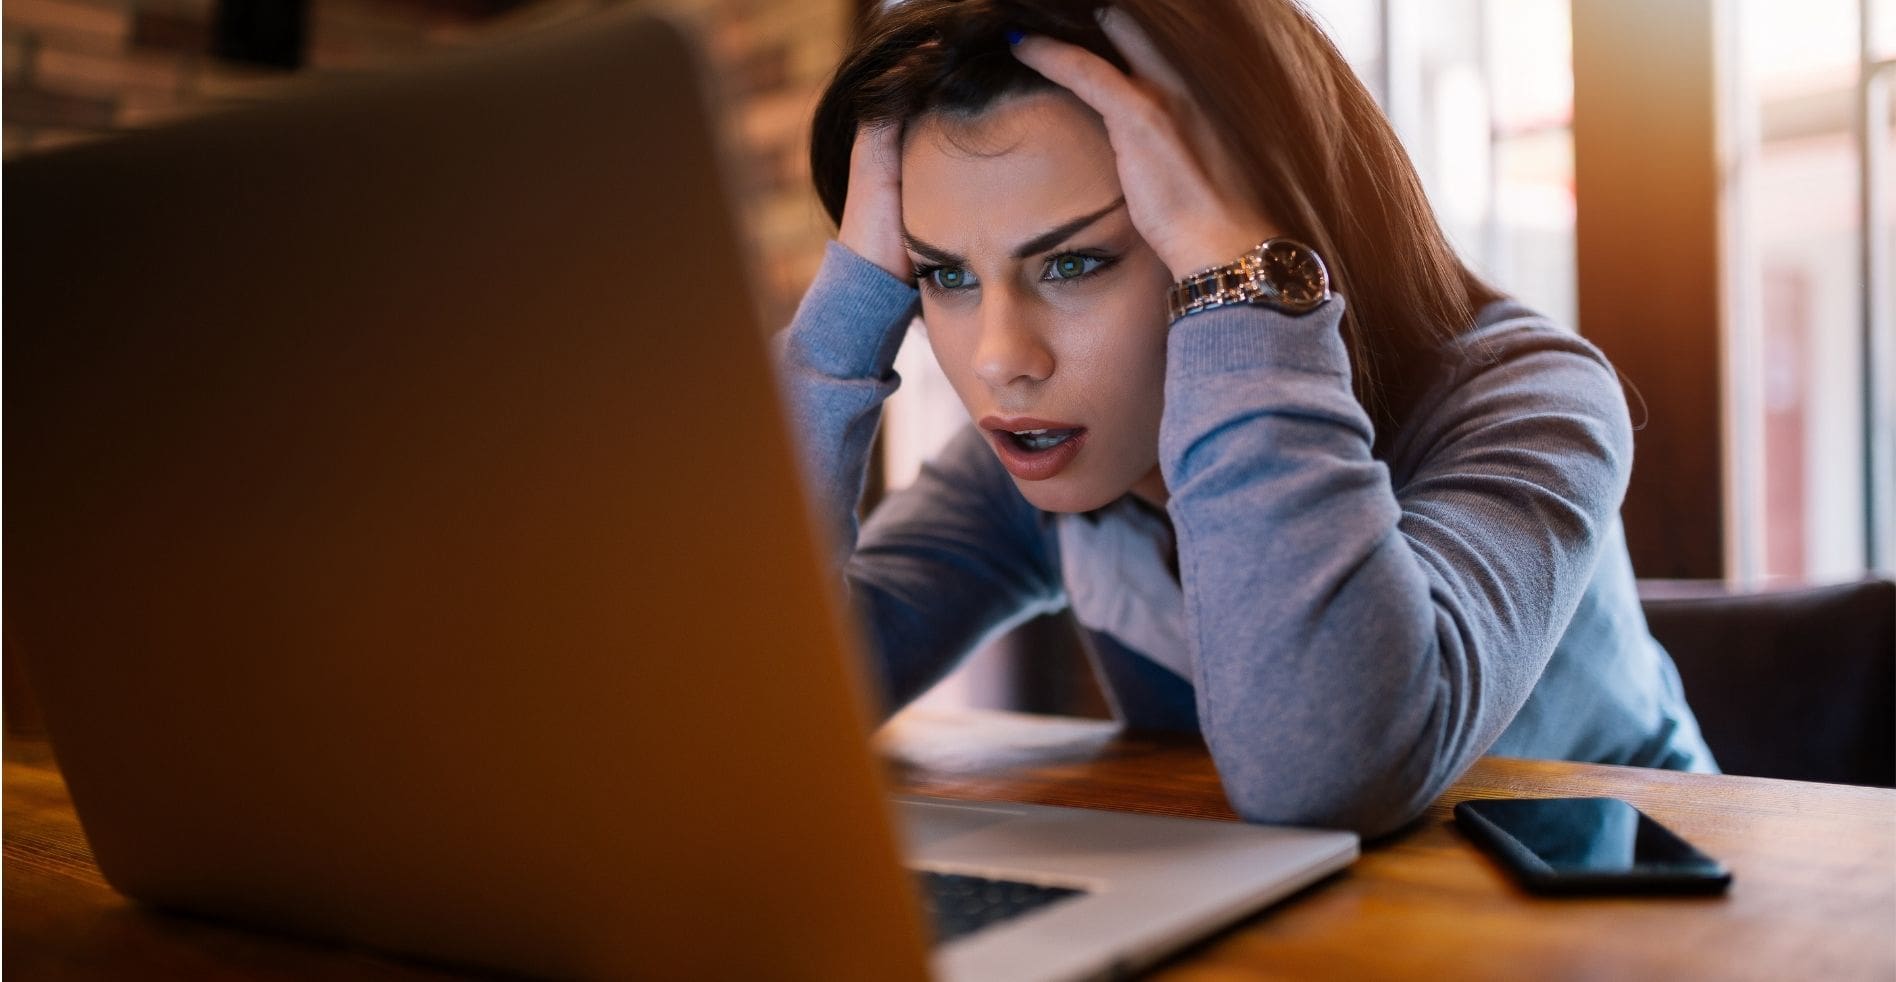 frustrated woman wondering why her computer is crashing on a regular basis